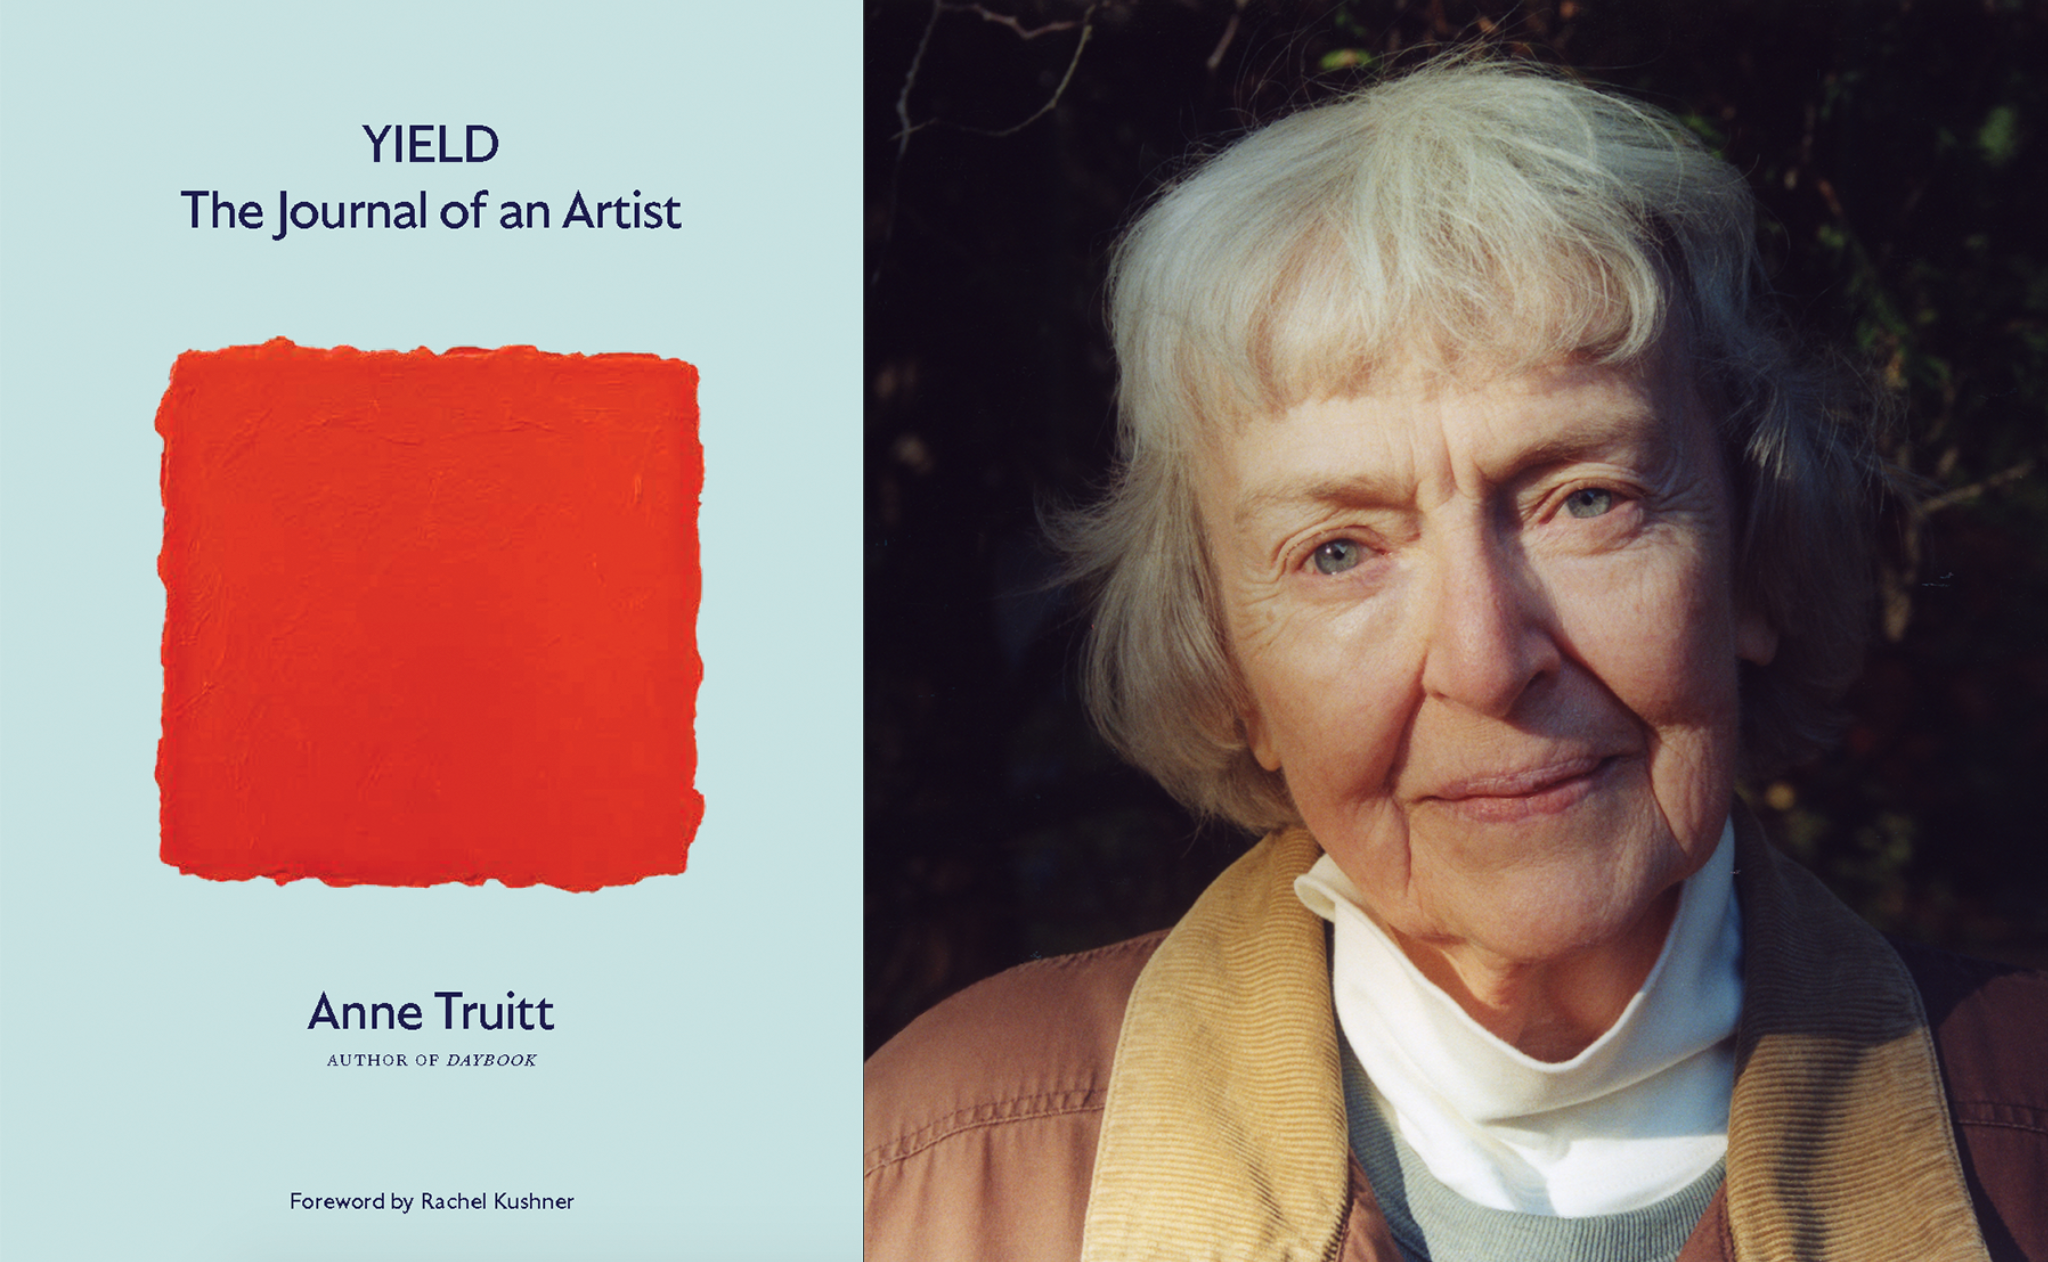 Berkeley, CA | Reading at the (Art)Table: YIELD – The Journal of an Artist, by Anne Truitt